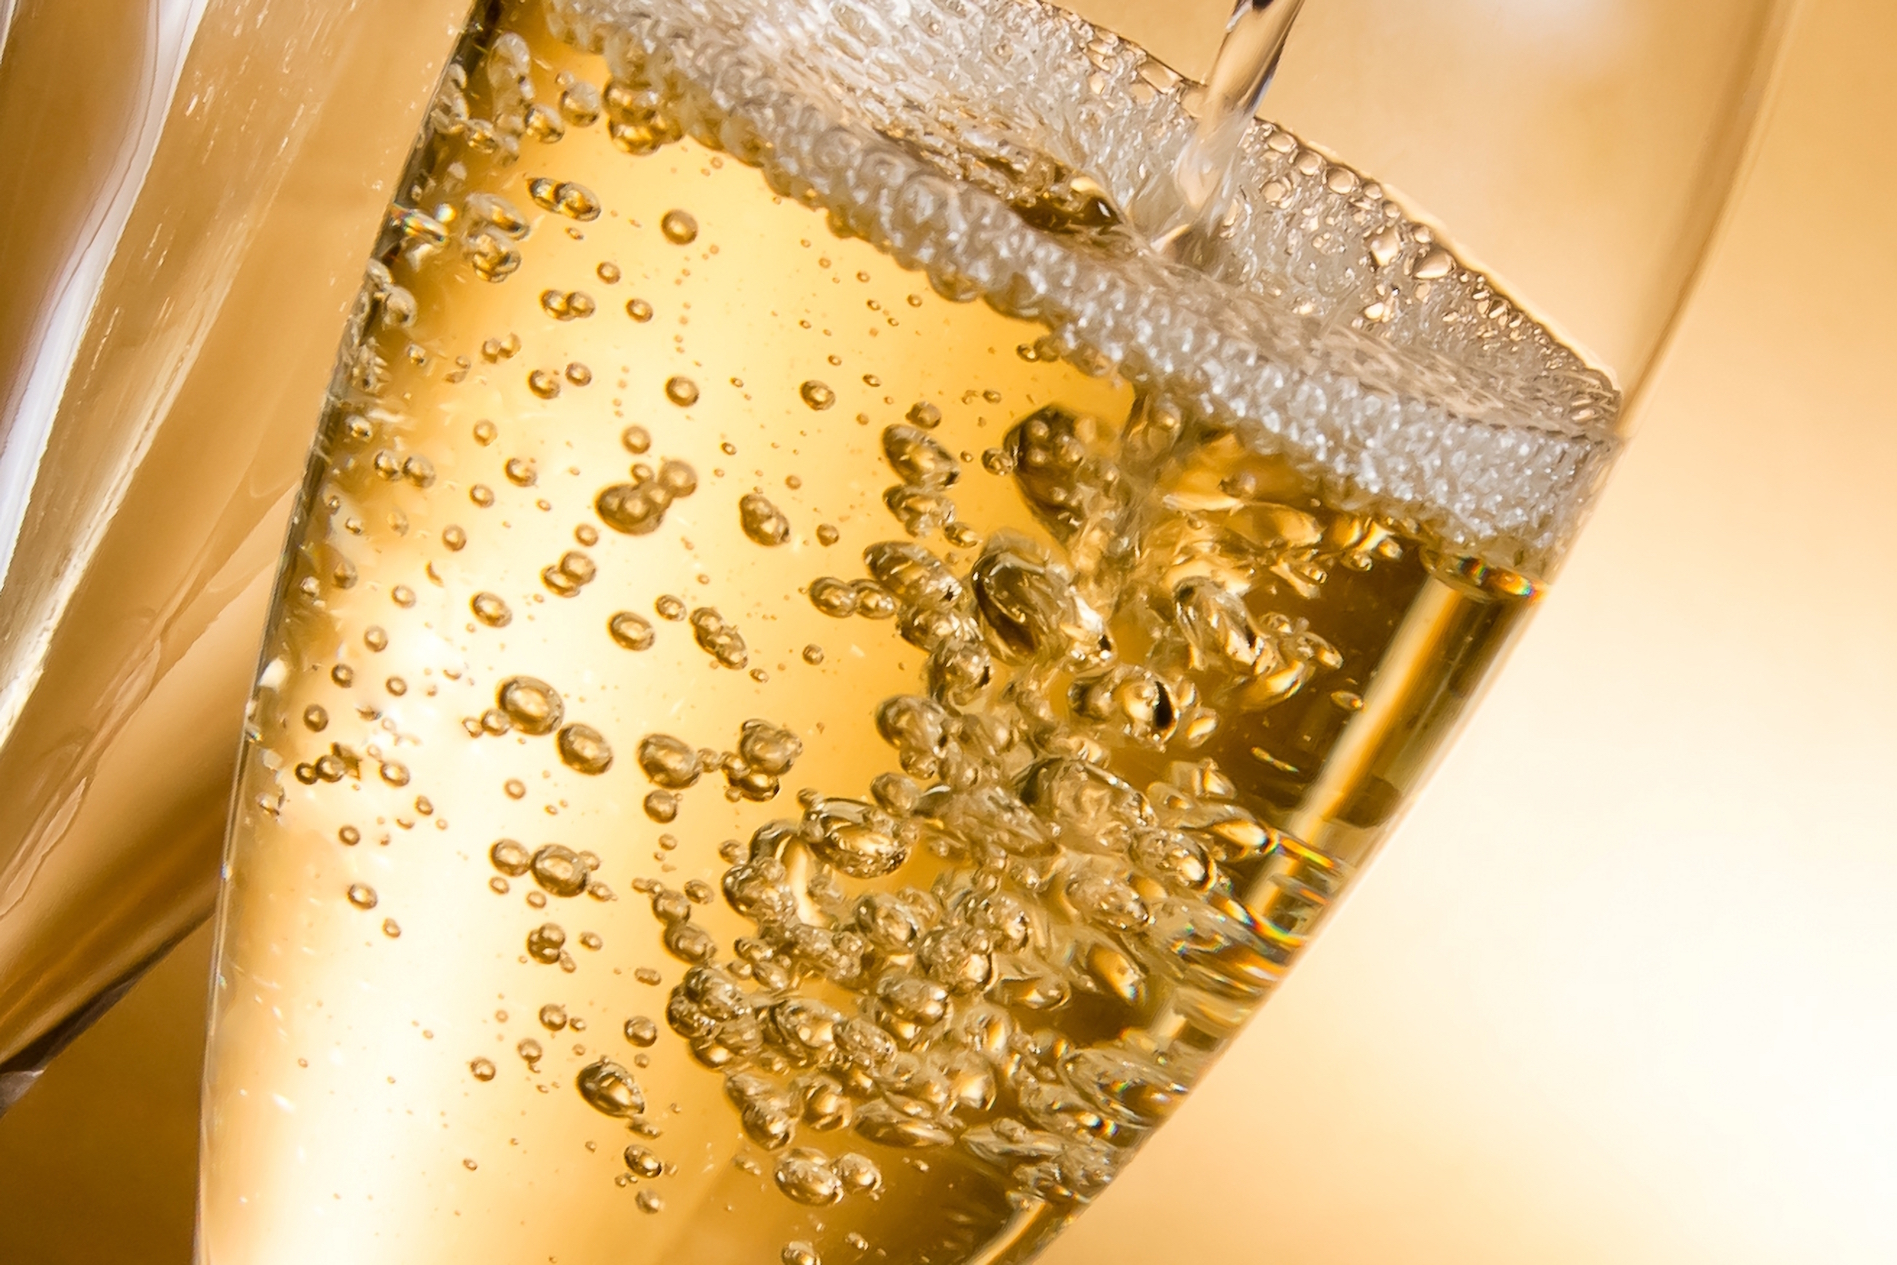 the-sound-of-champagne-bubbles-can-indicate-quality.jpg